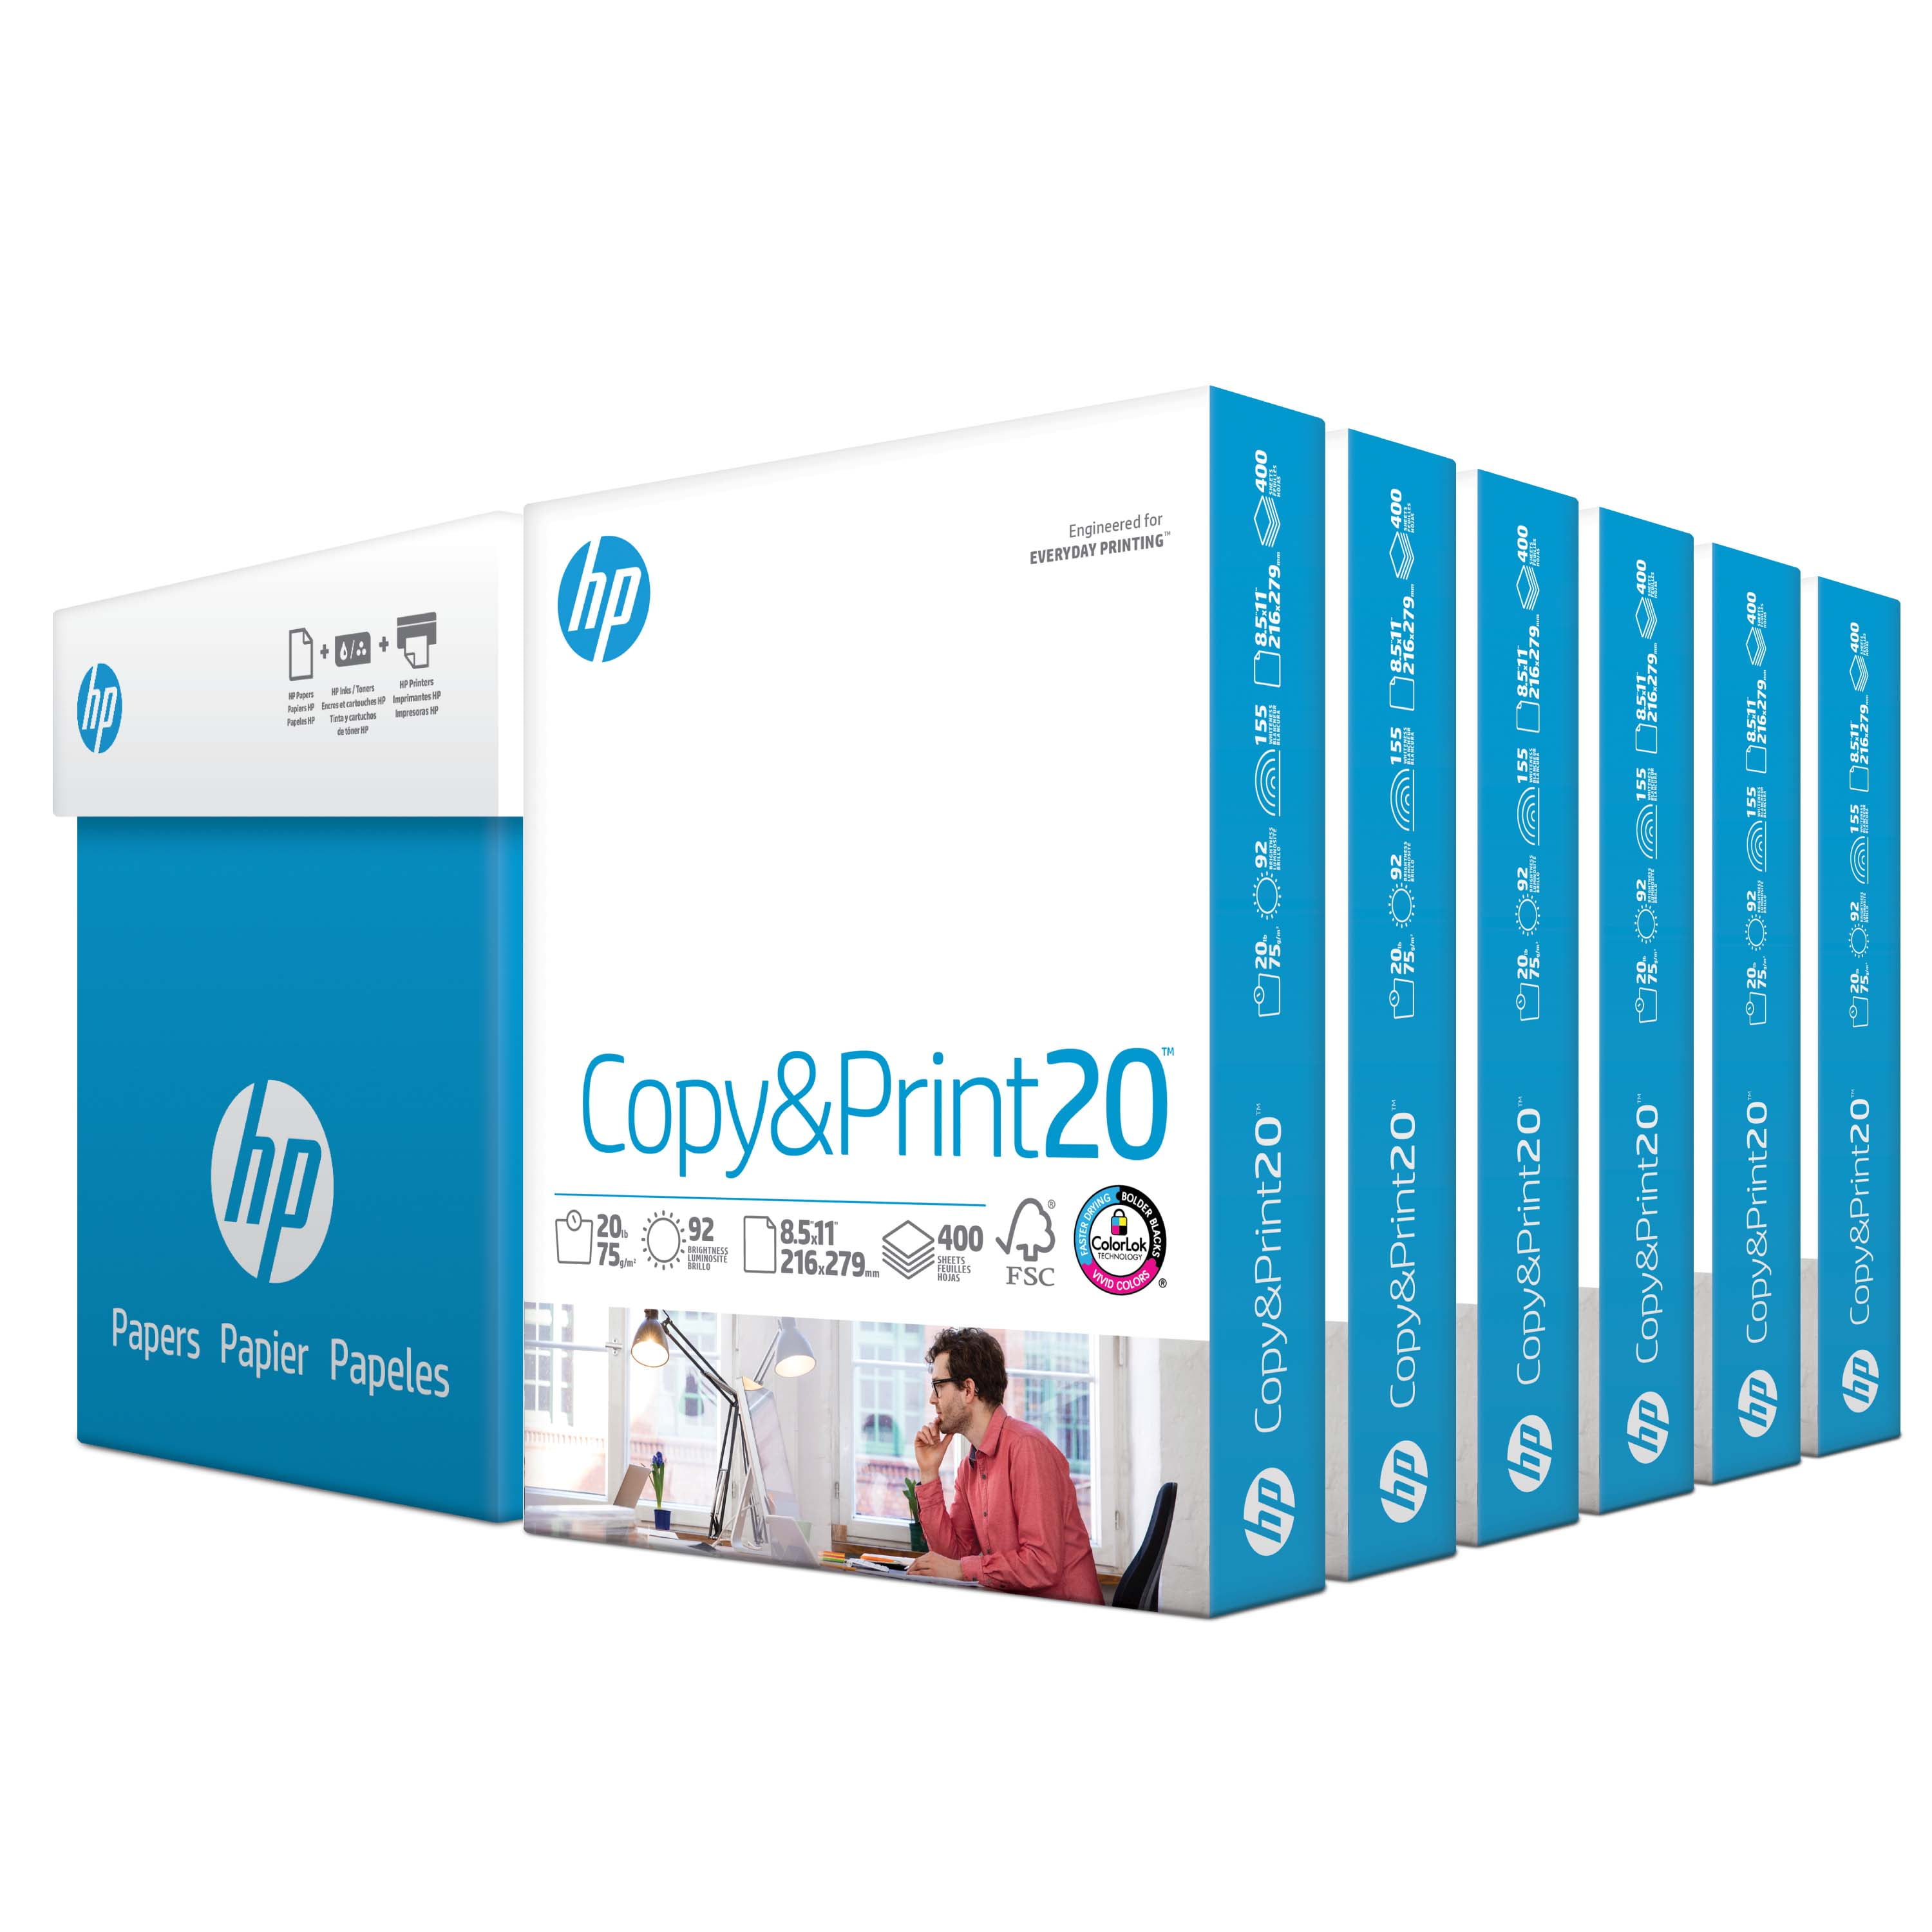 HP Printer Papers Office 20lb 500 Sheets Reams White Copy Printing 8.5 x 11 